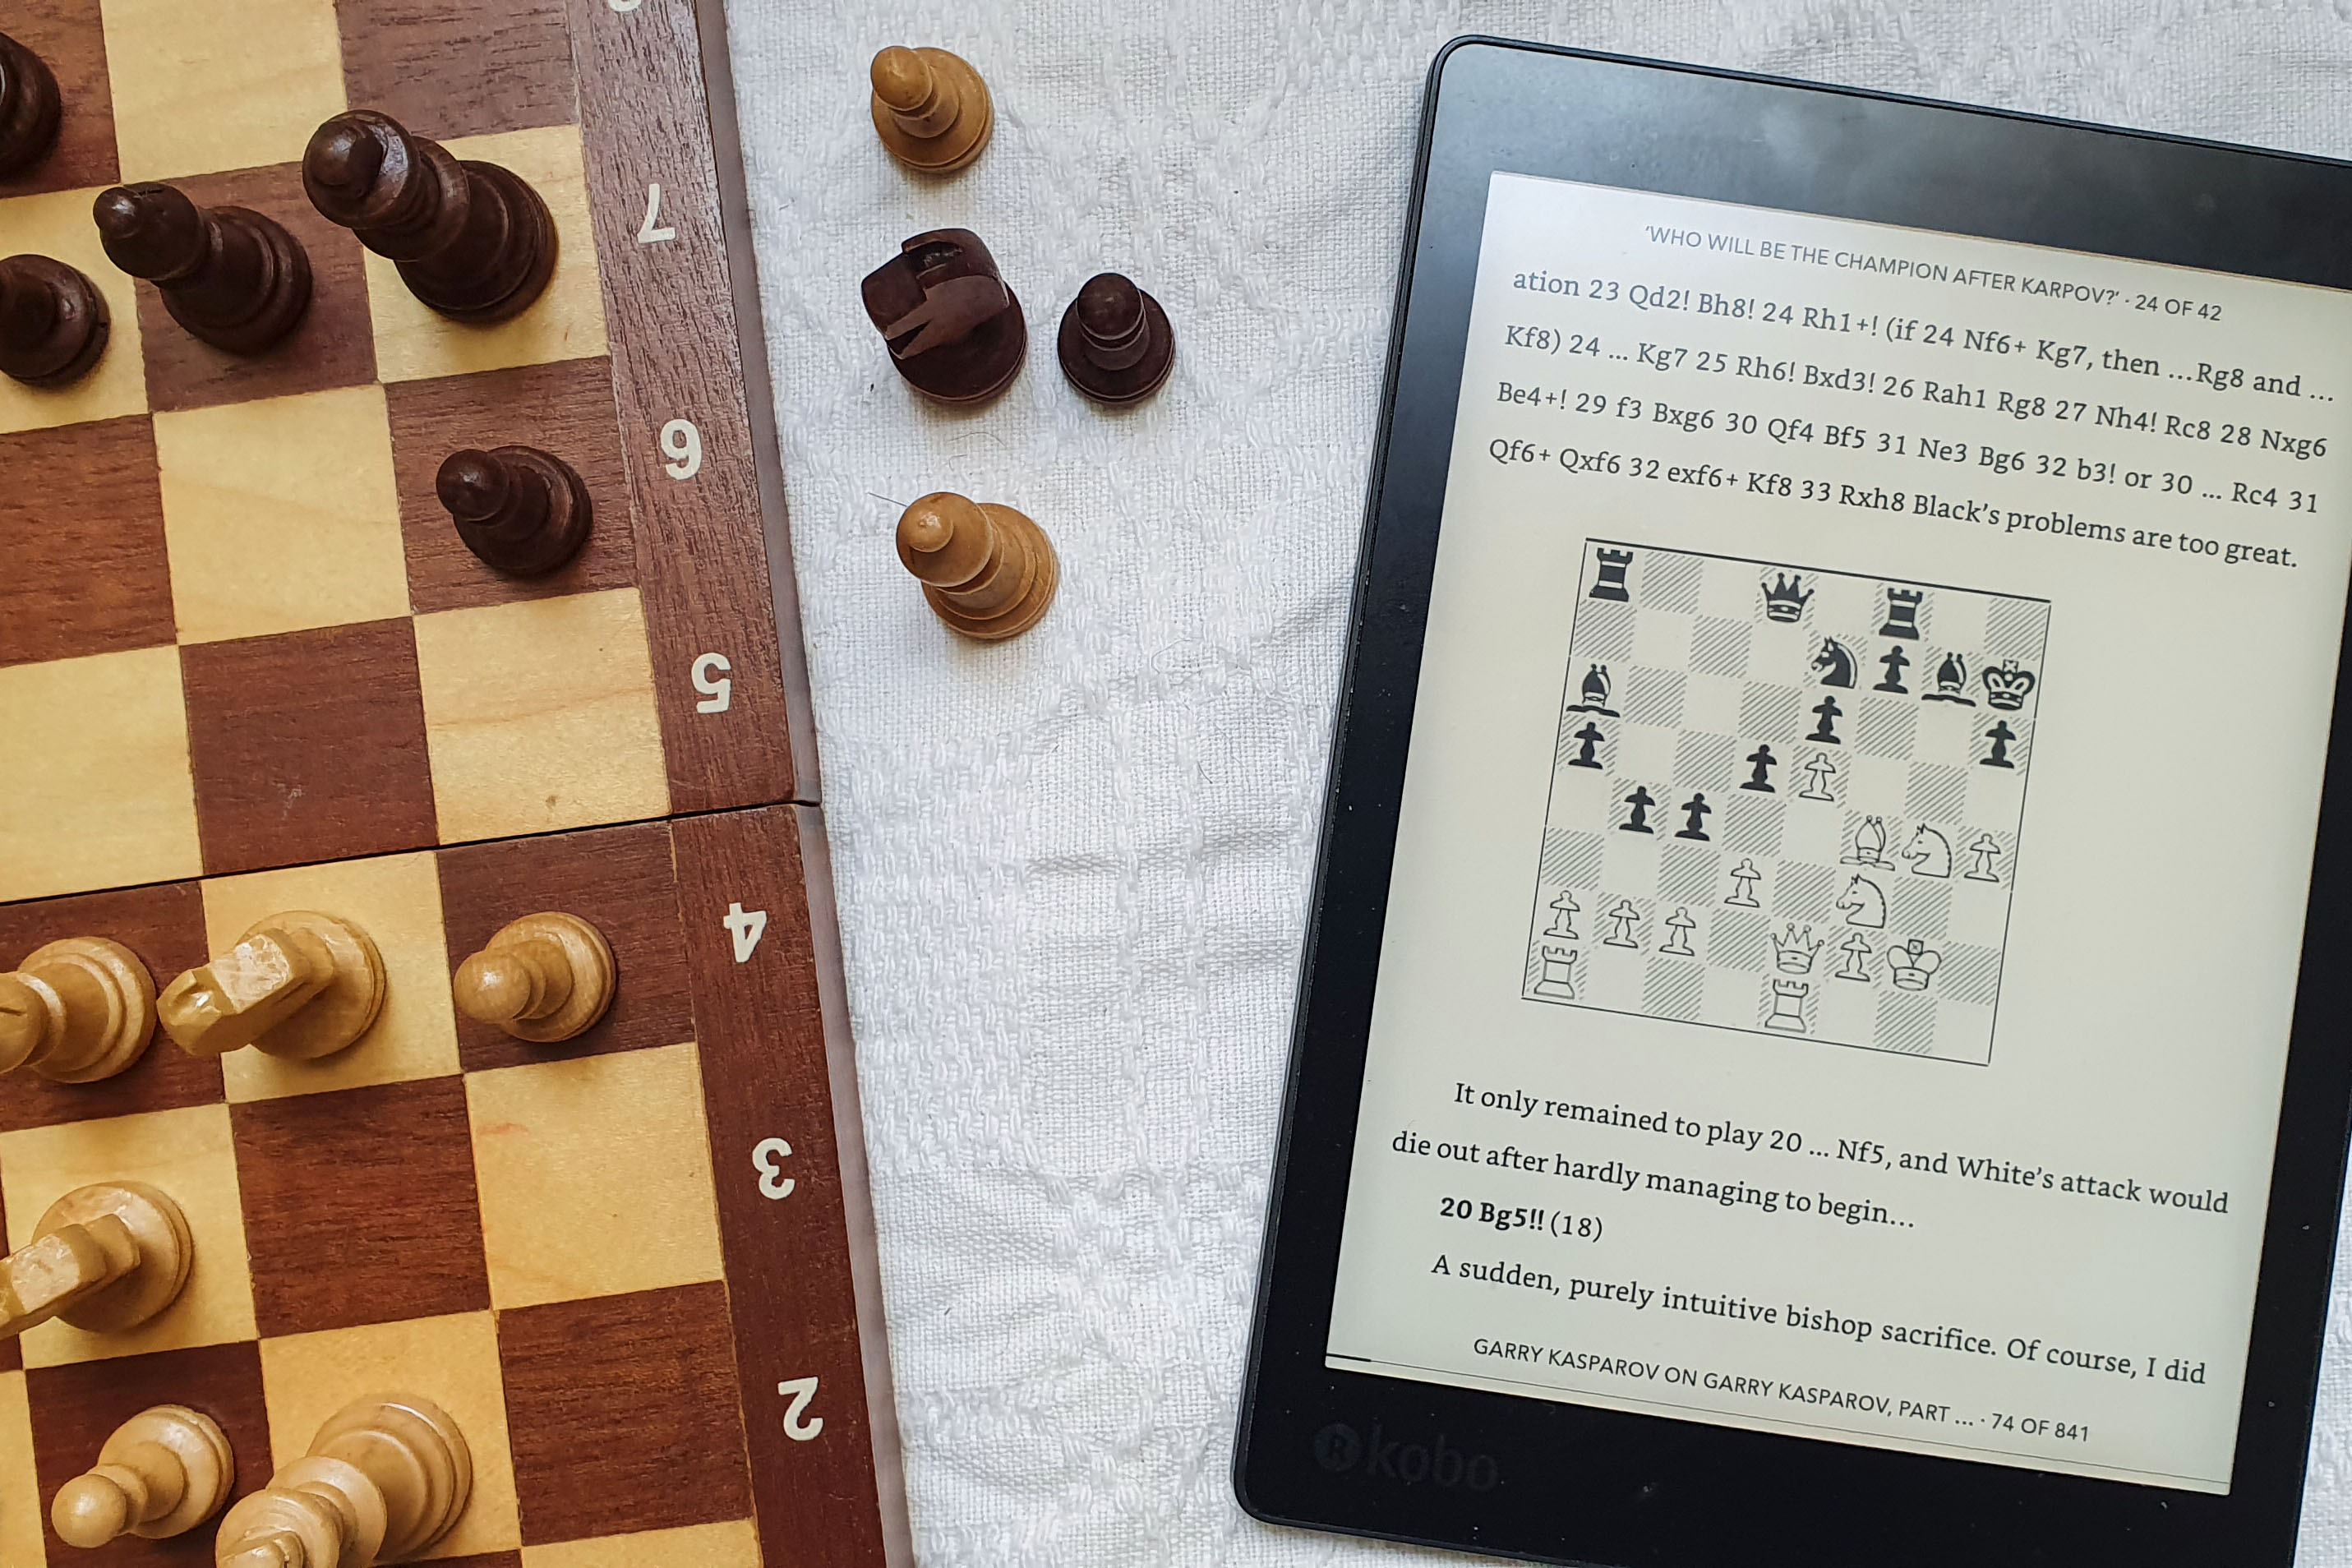 ChessBase Complete: Chess in the Digital Age - Edwards – Chess House